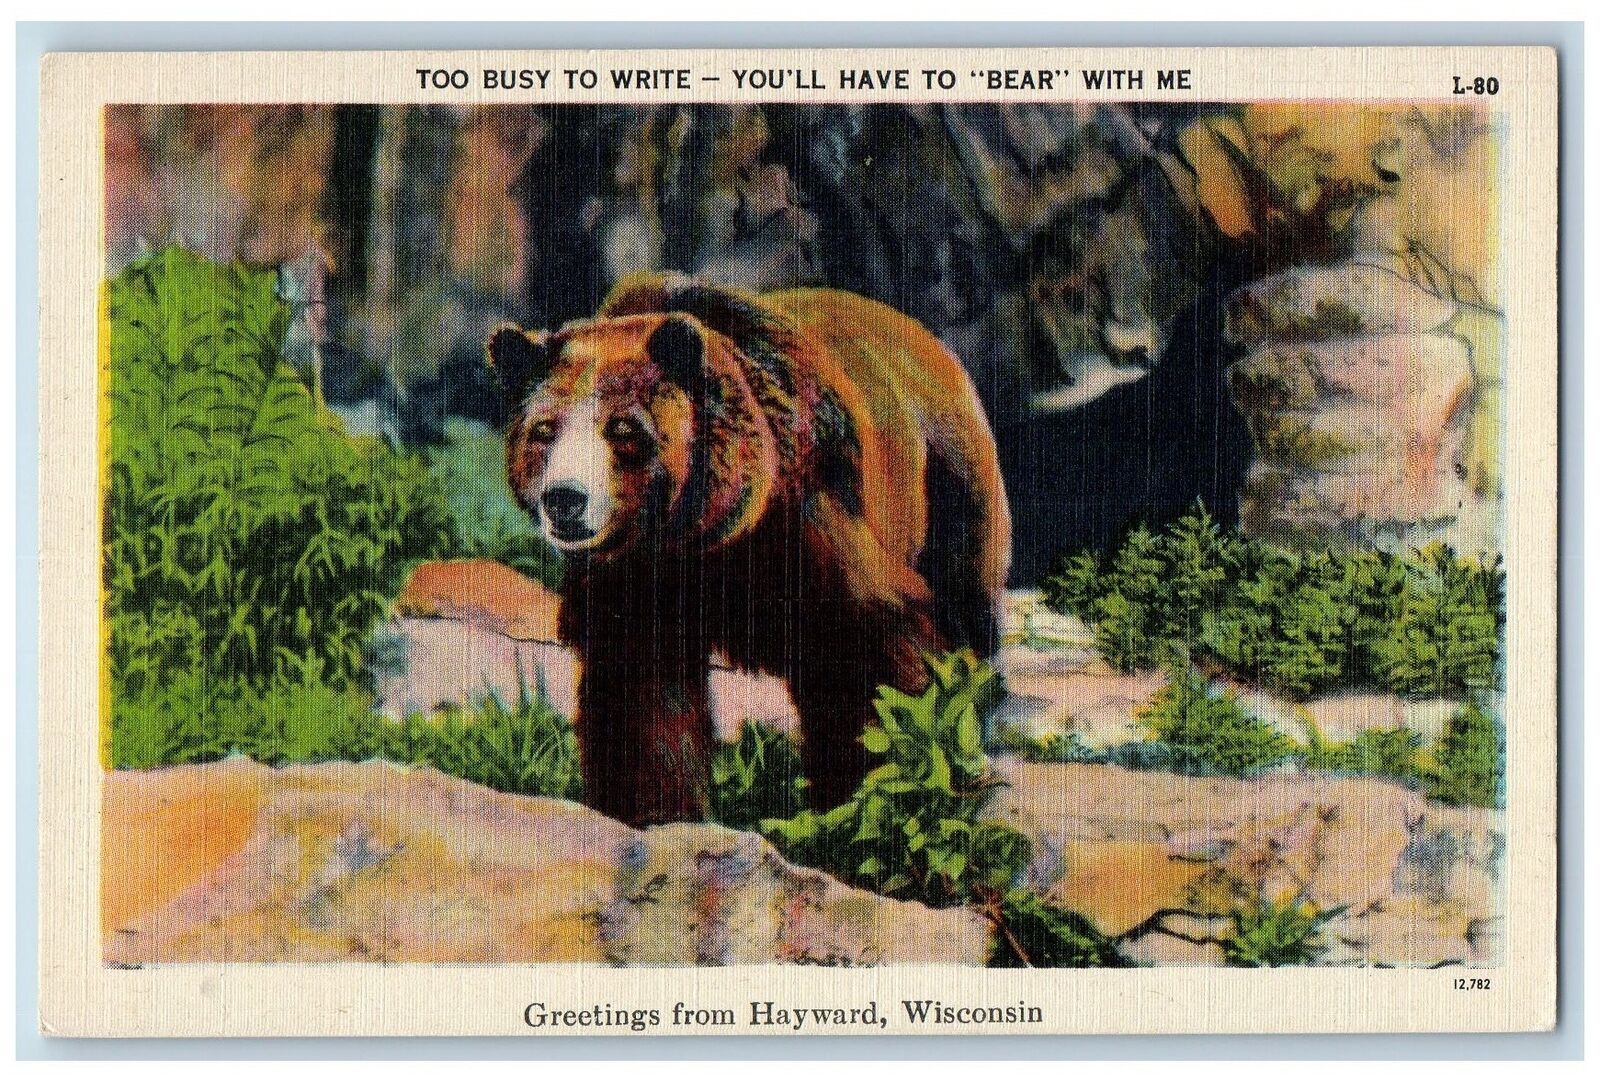 Hayward Wisconsin Postcard Greetings Too Busy To Write You\'ll Have To Bear c1940